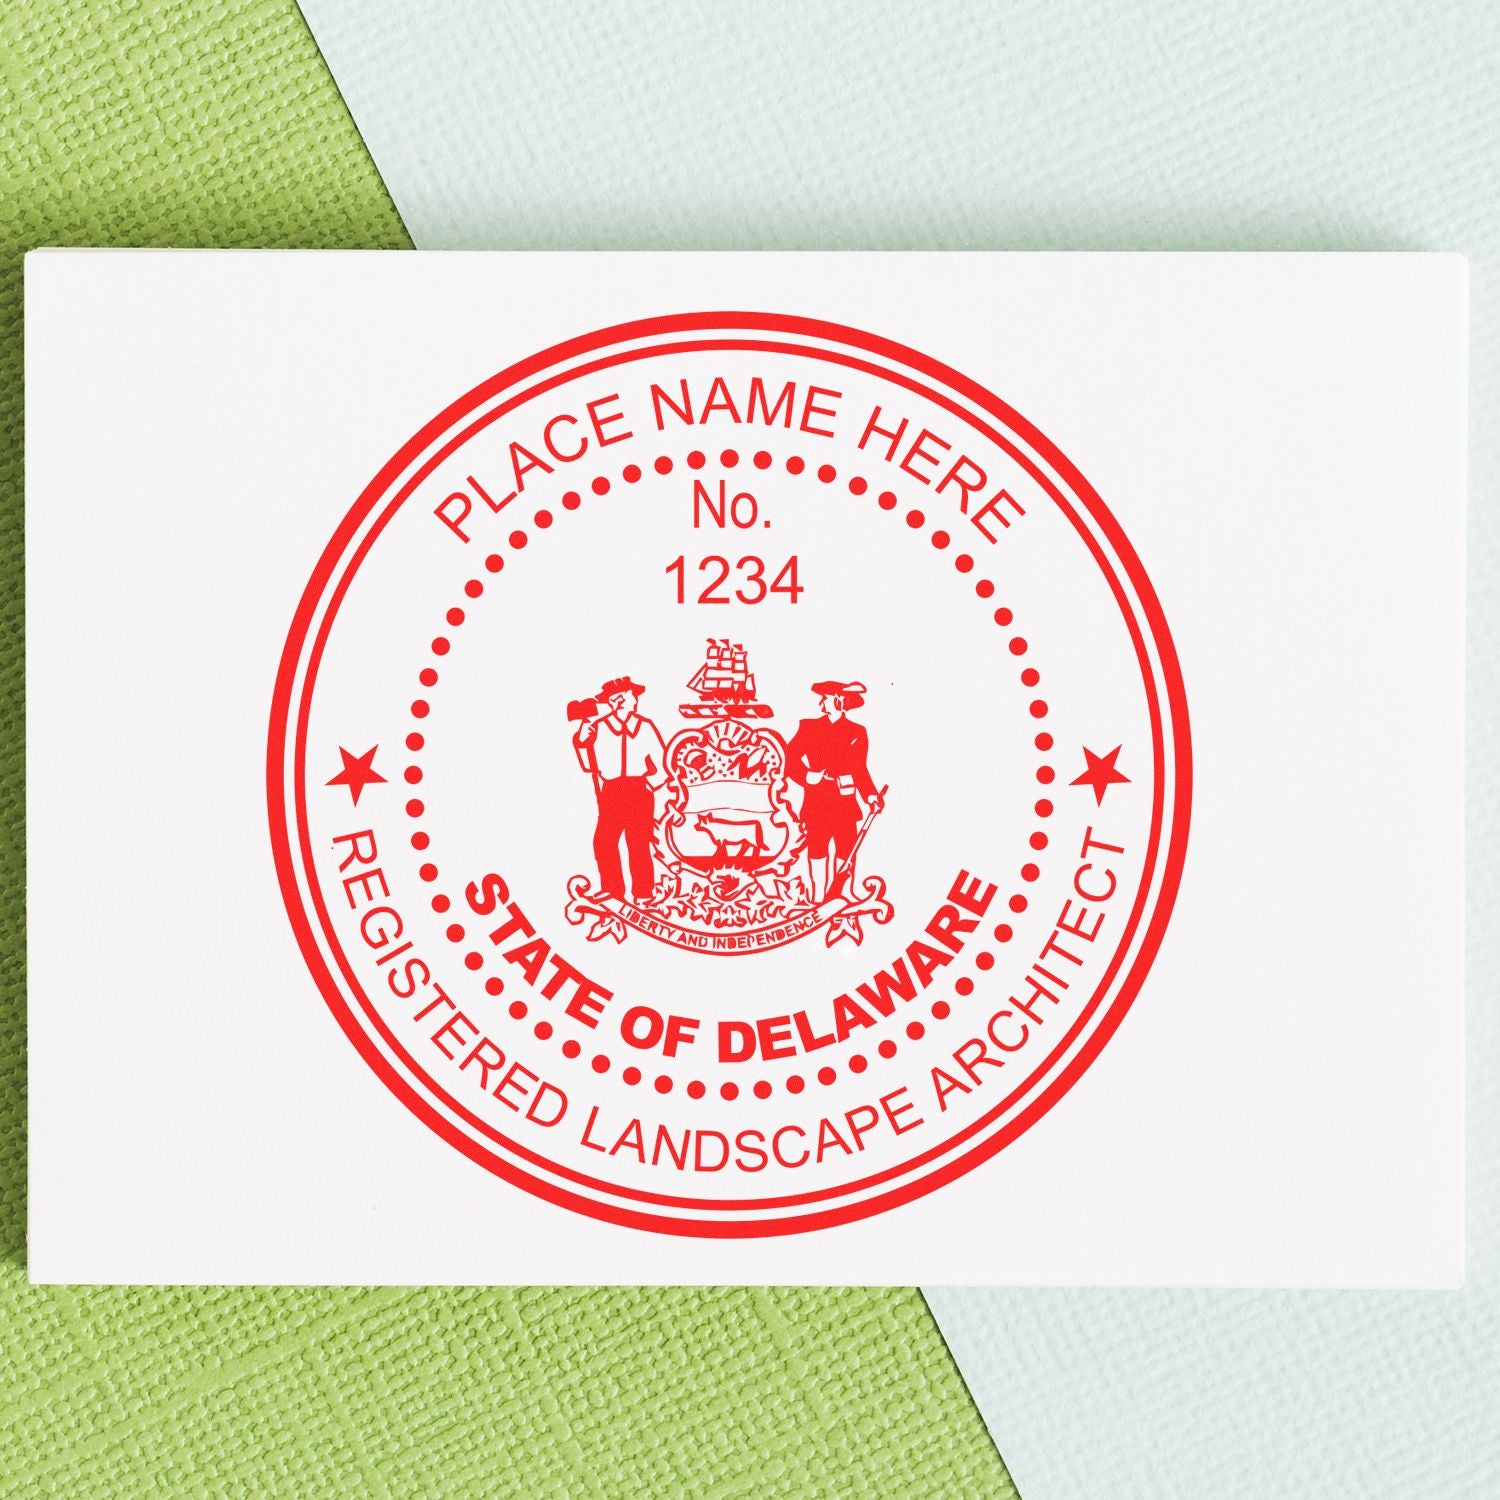 The Delaware Landscape Architectural Seal Stamp stamp impression comes to life with a crisp, detailed photo on paper - showcasing true professional quality.